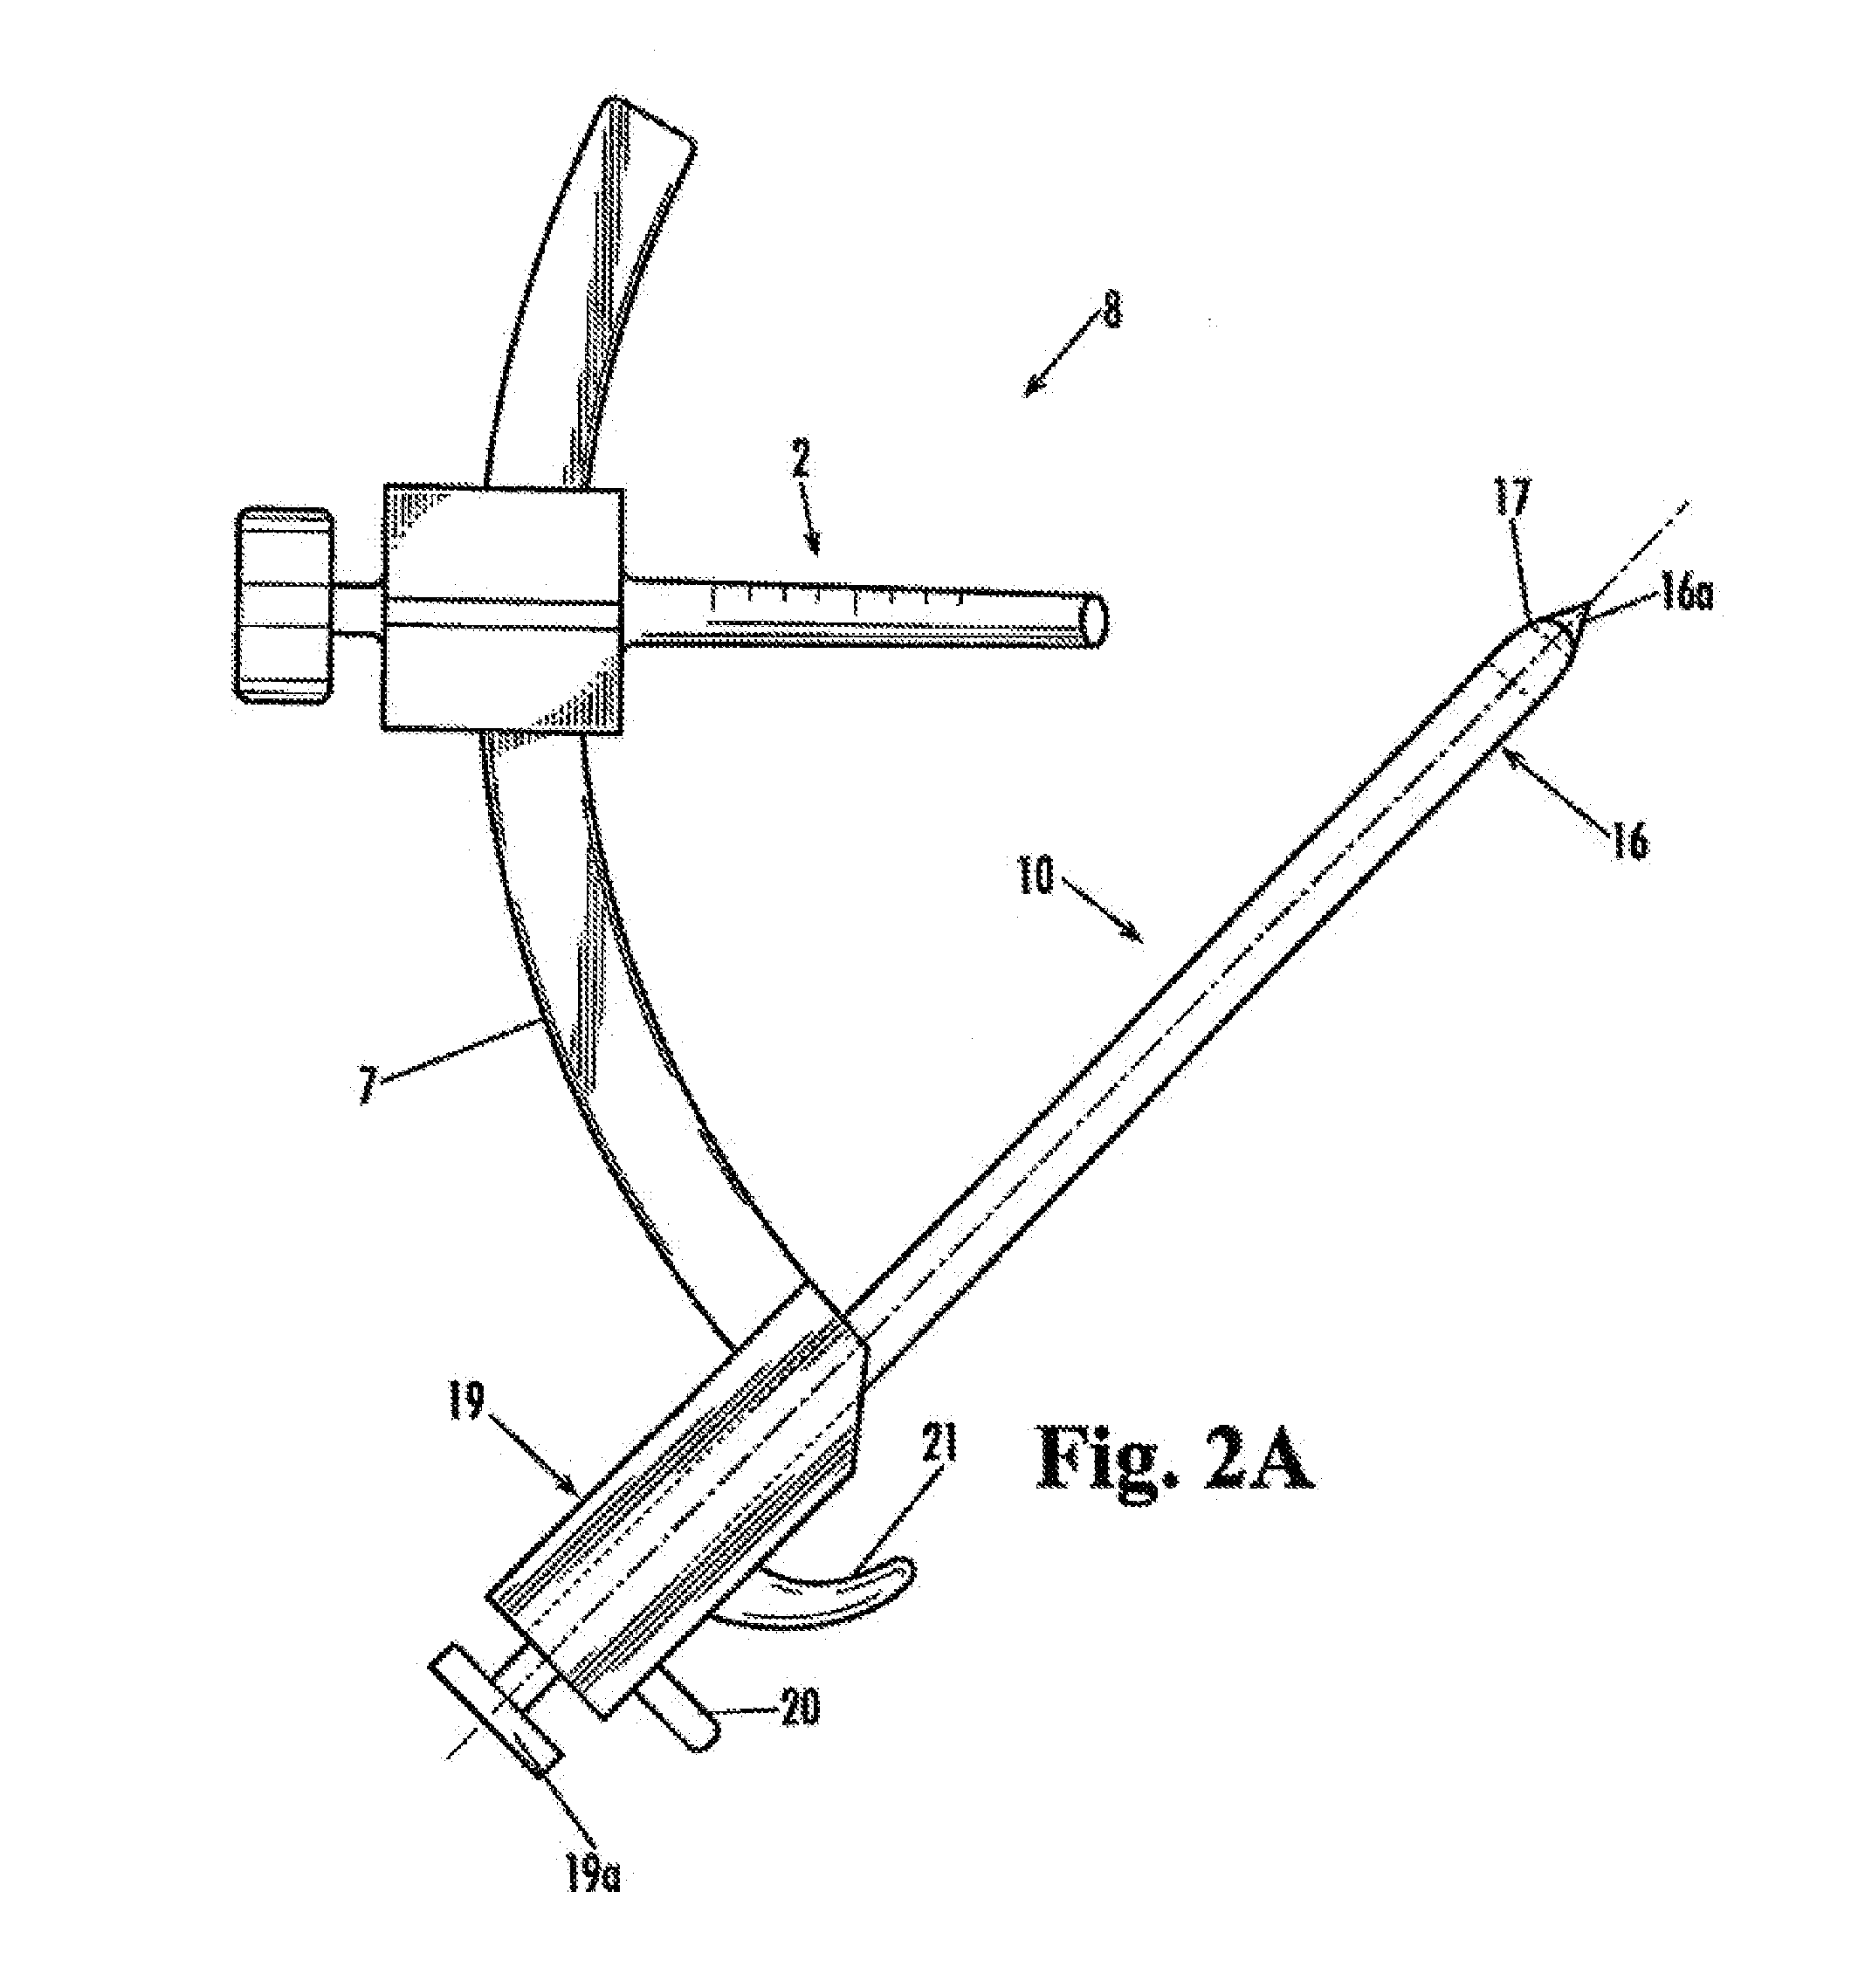 Method for drilling enlarged sections of angled osteal tunnels